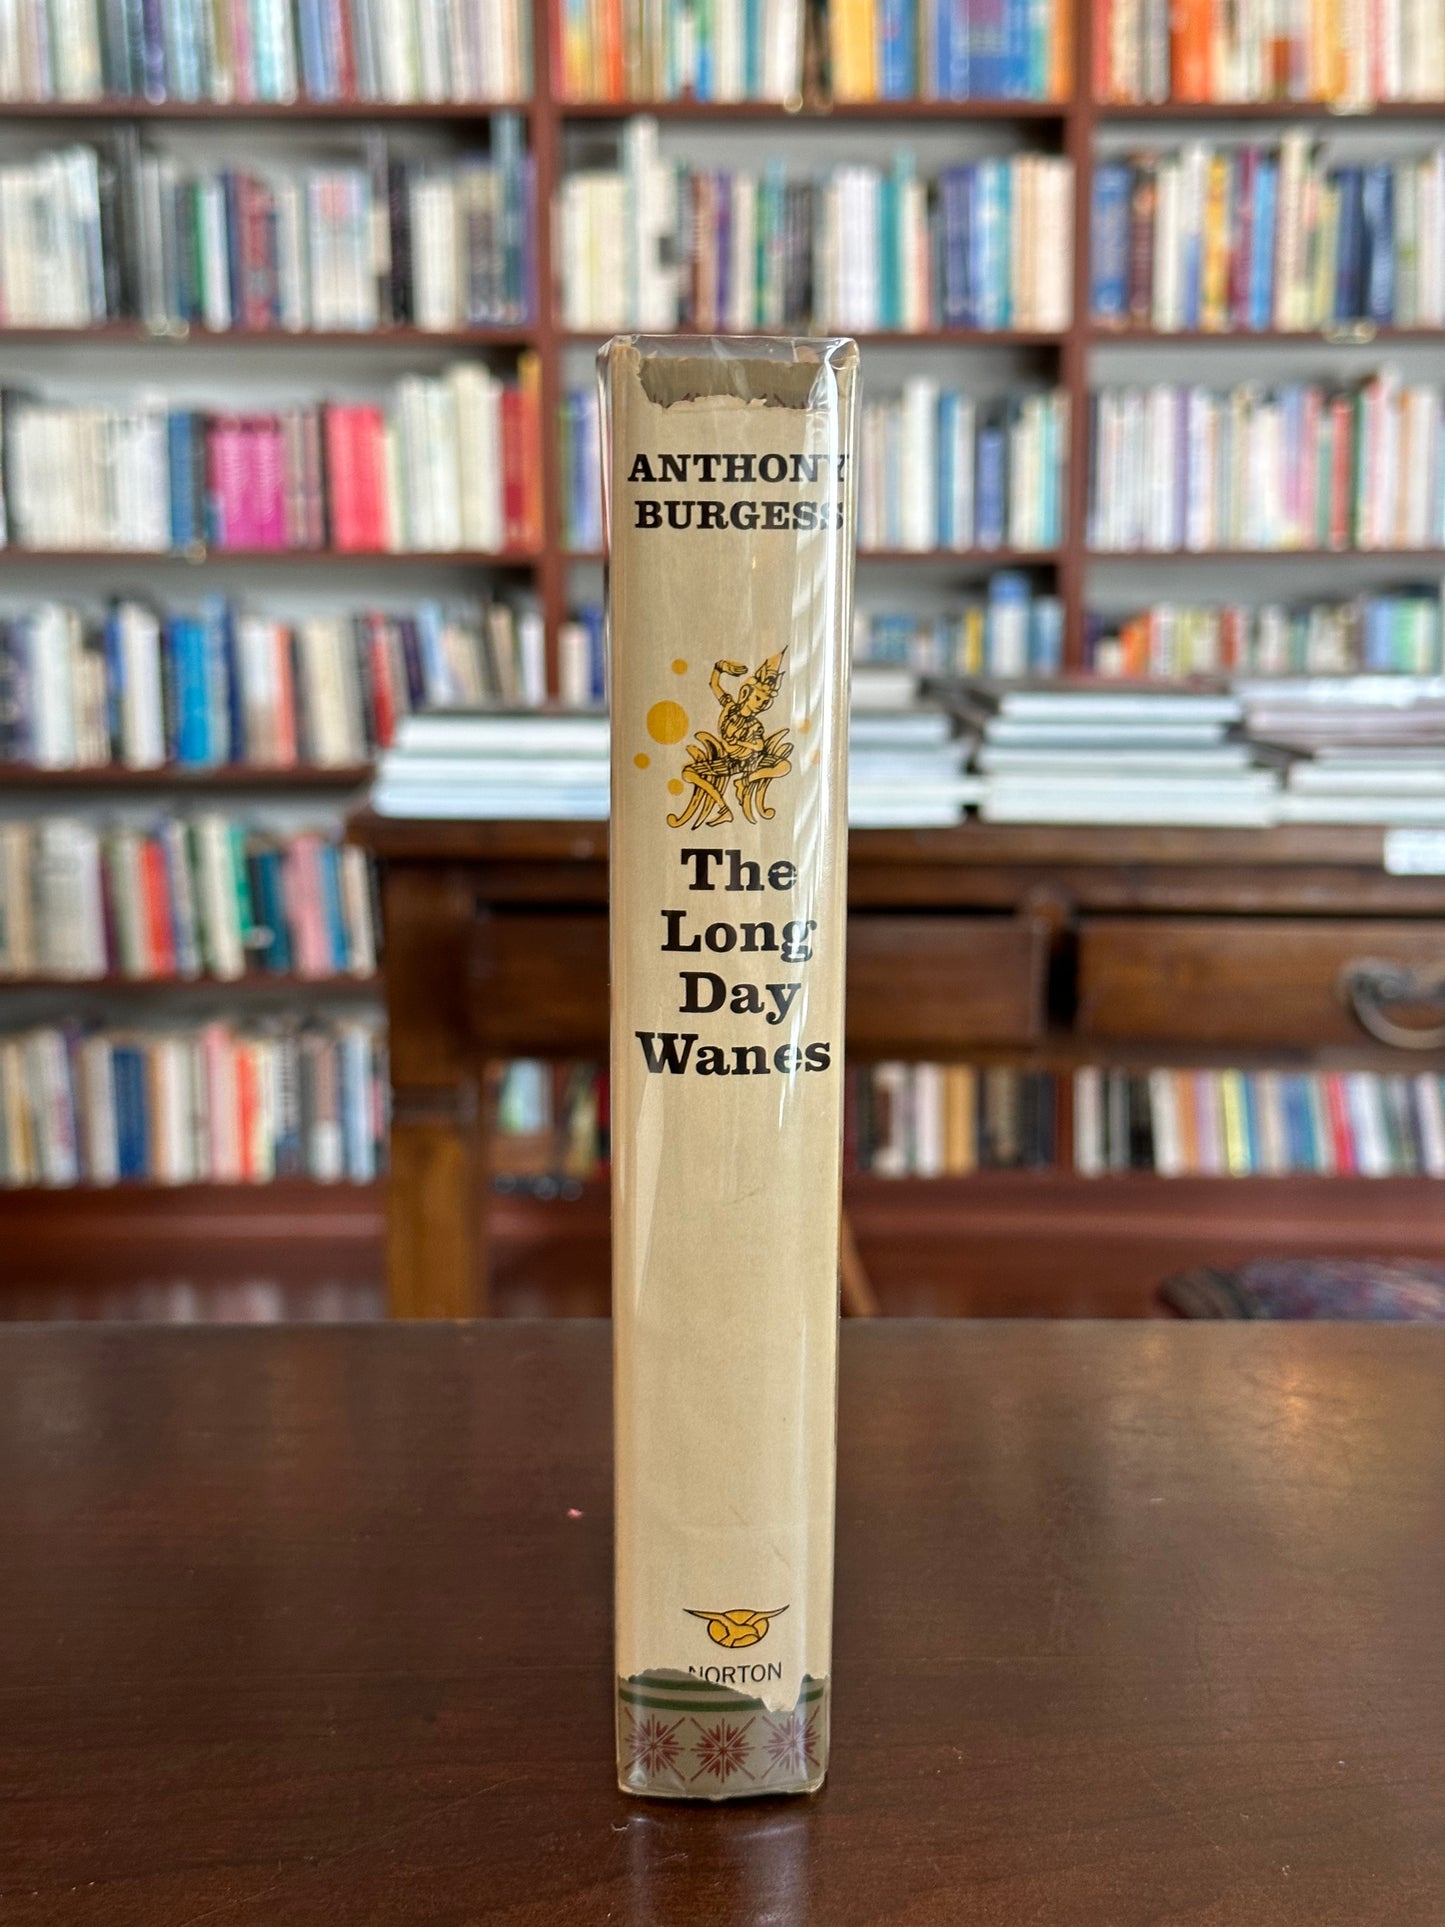 The Long Day Wanes by Anthony Burgess